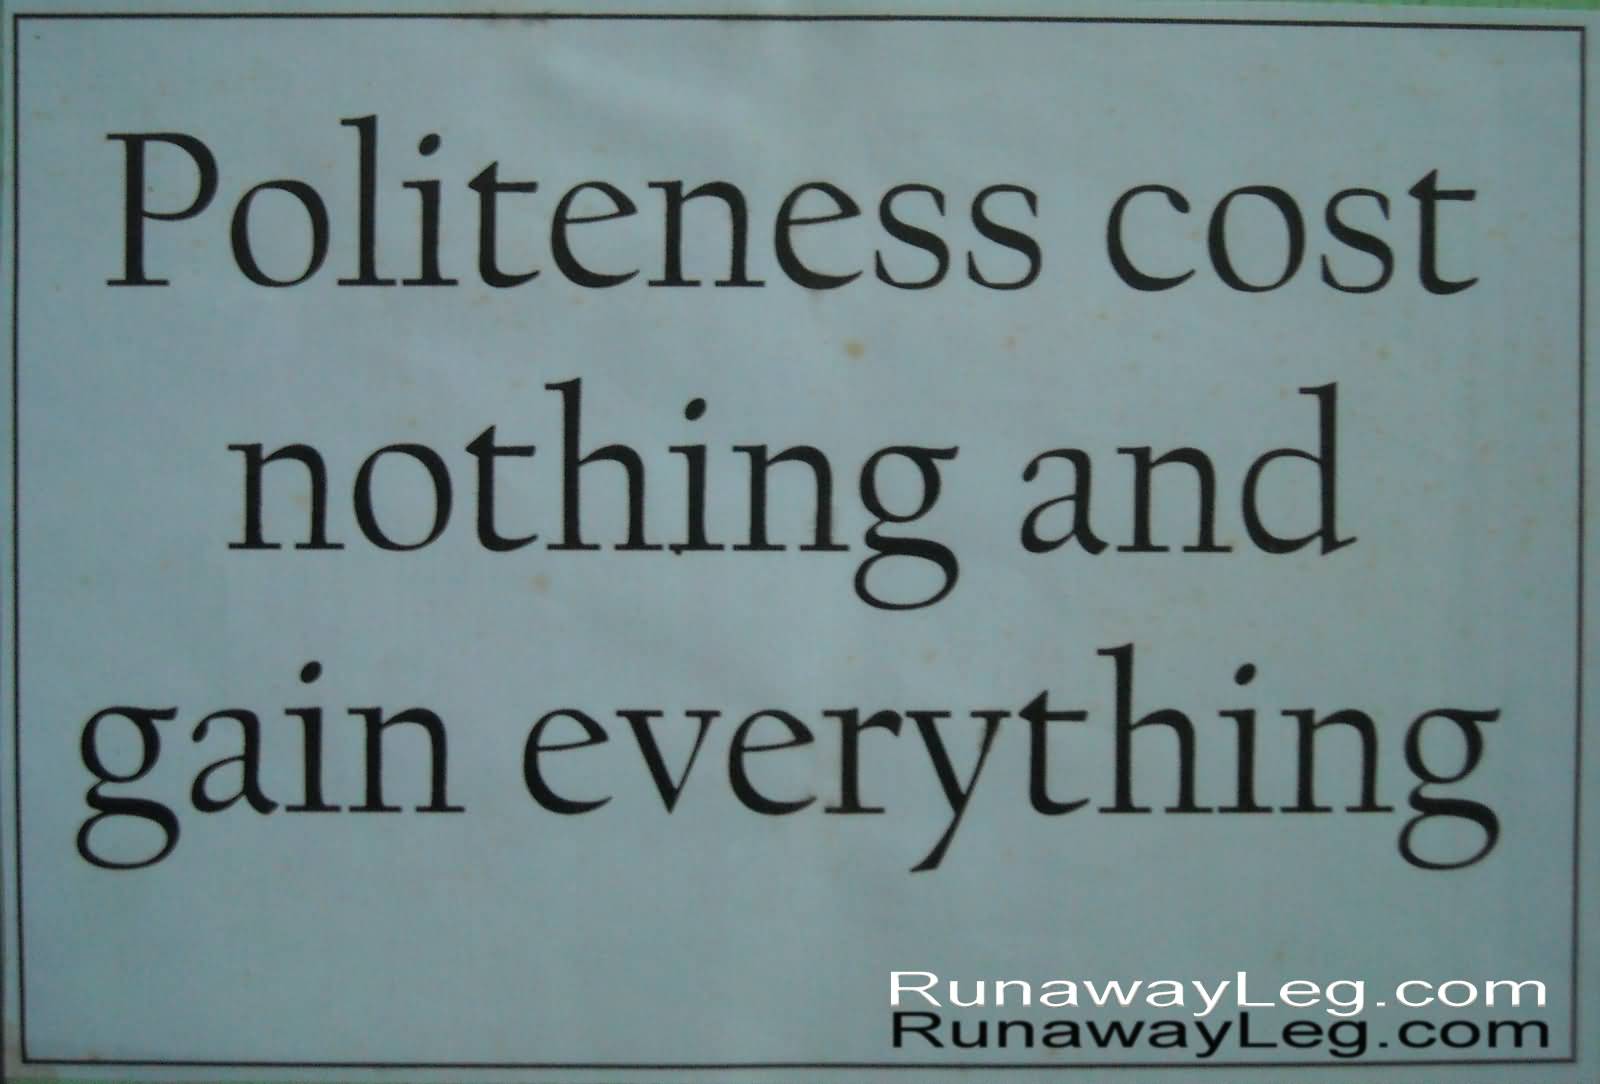 Politeness cost nothing and gain everything